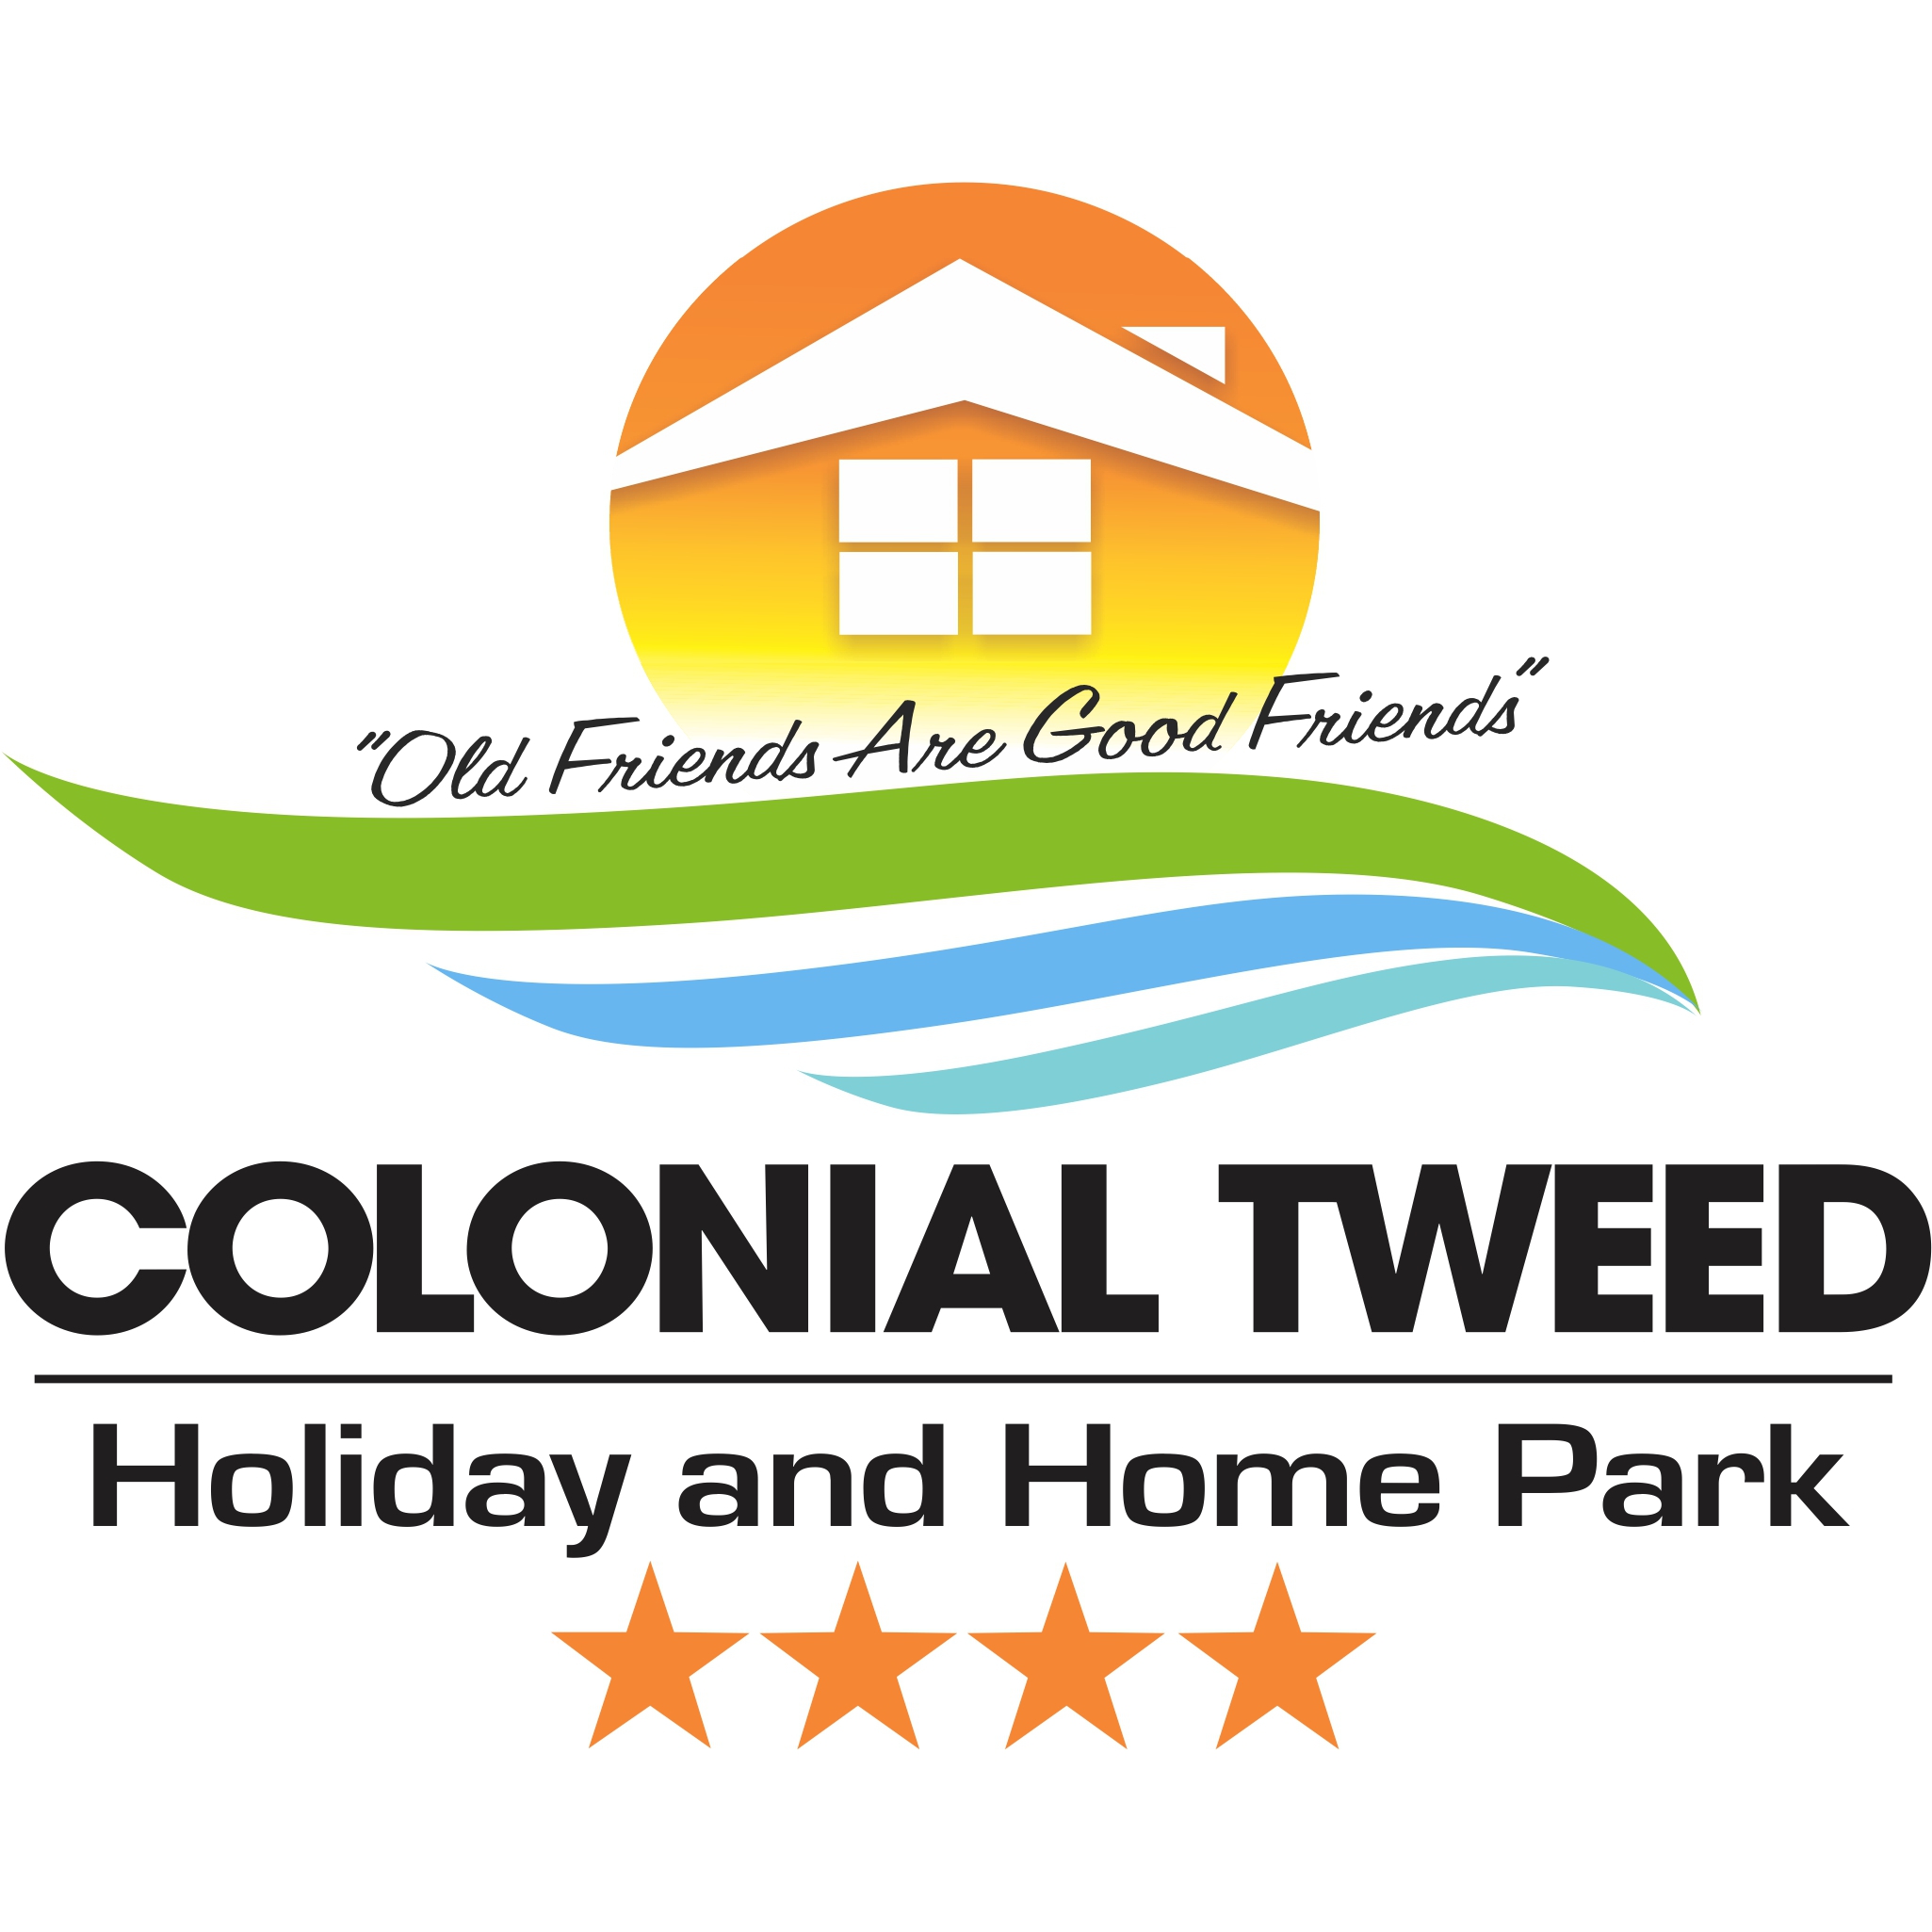 Colonial Tweed Holiday and Home Park Cassowary Coast